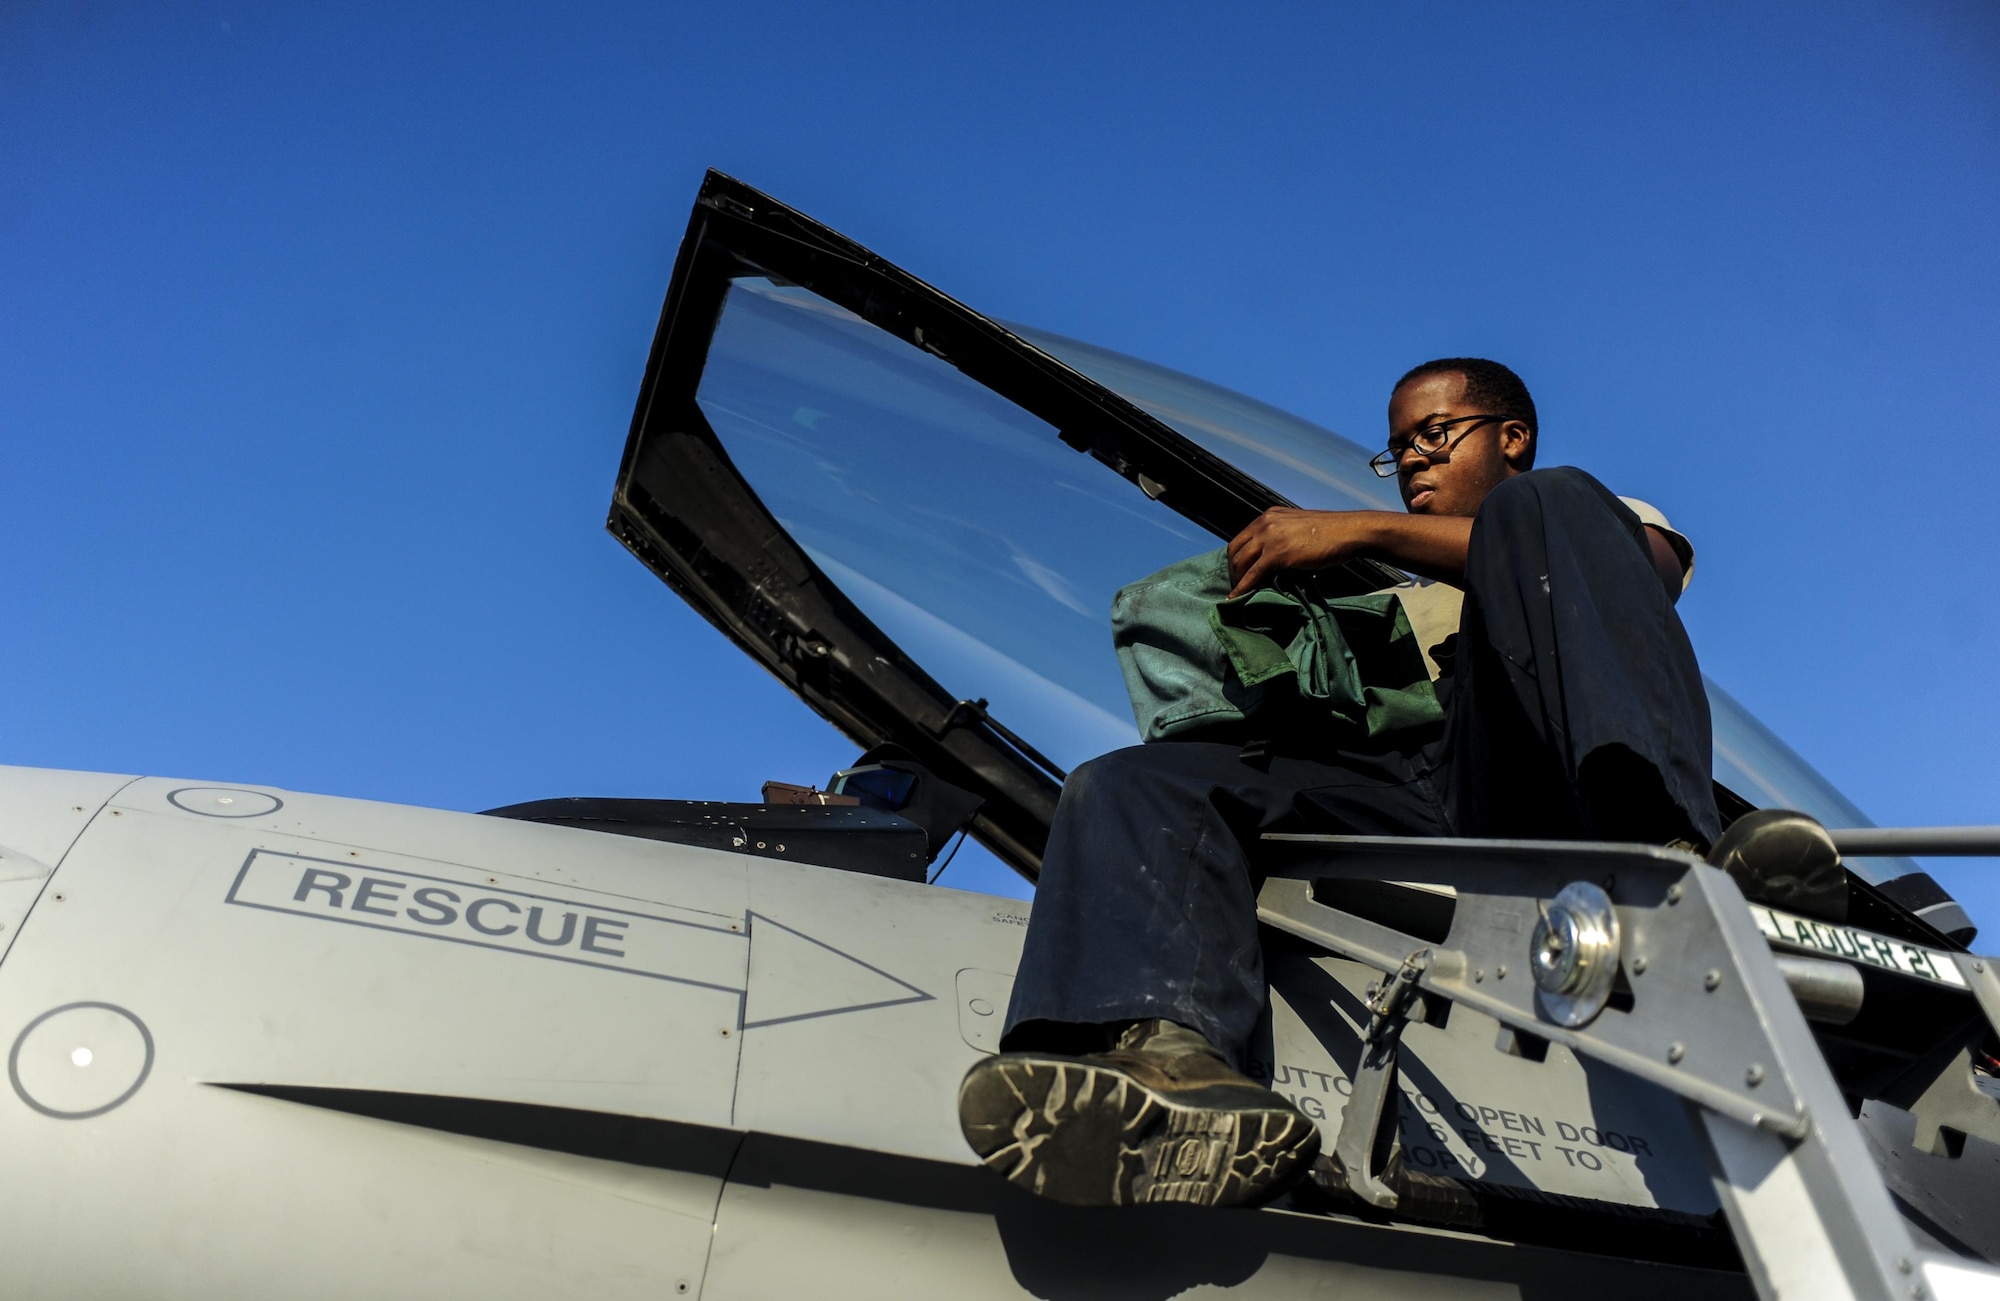 Airman 1st Class Obadiyah Ivens, 555th Fighter Squadron Crew Chief, Aviano Air Force Base, Italy, prepares the cockpit of an F-16 Fighting Falcon at Nellis Air Force Base, Nev., August 2, 2016, for participation in Green Flag 16-8. Green Flag is a close air support and joint exercise administered by the U.S. Air Force Air Warfare Center and Nellis AFB through the 549th Combat Training Squadron. (United States Air Force photo by Airman 1st Class Kevin Tanenbaum/Released)